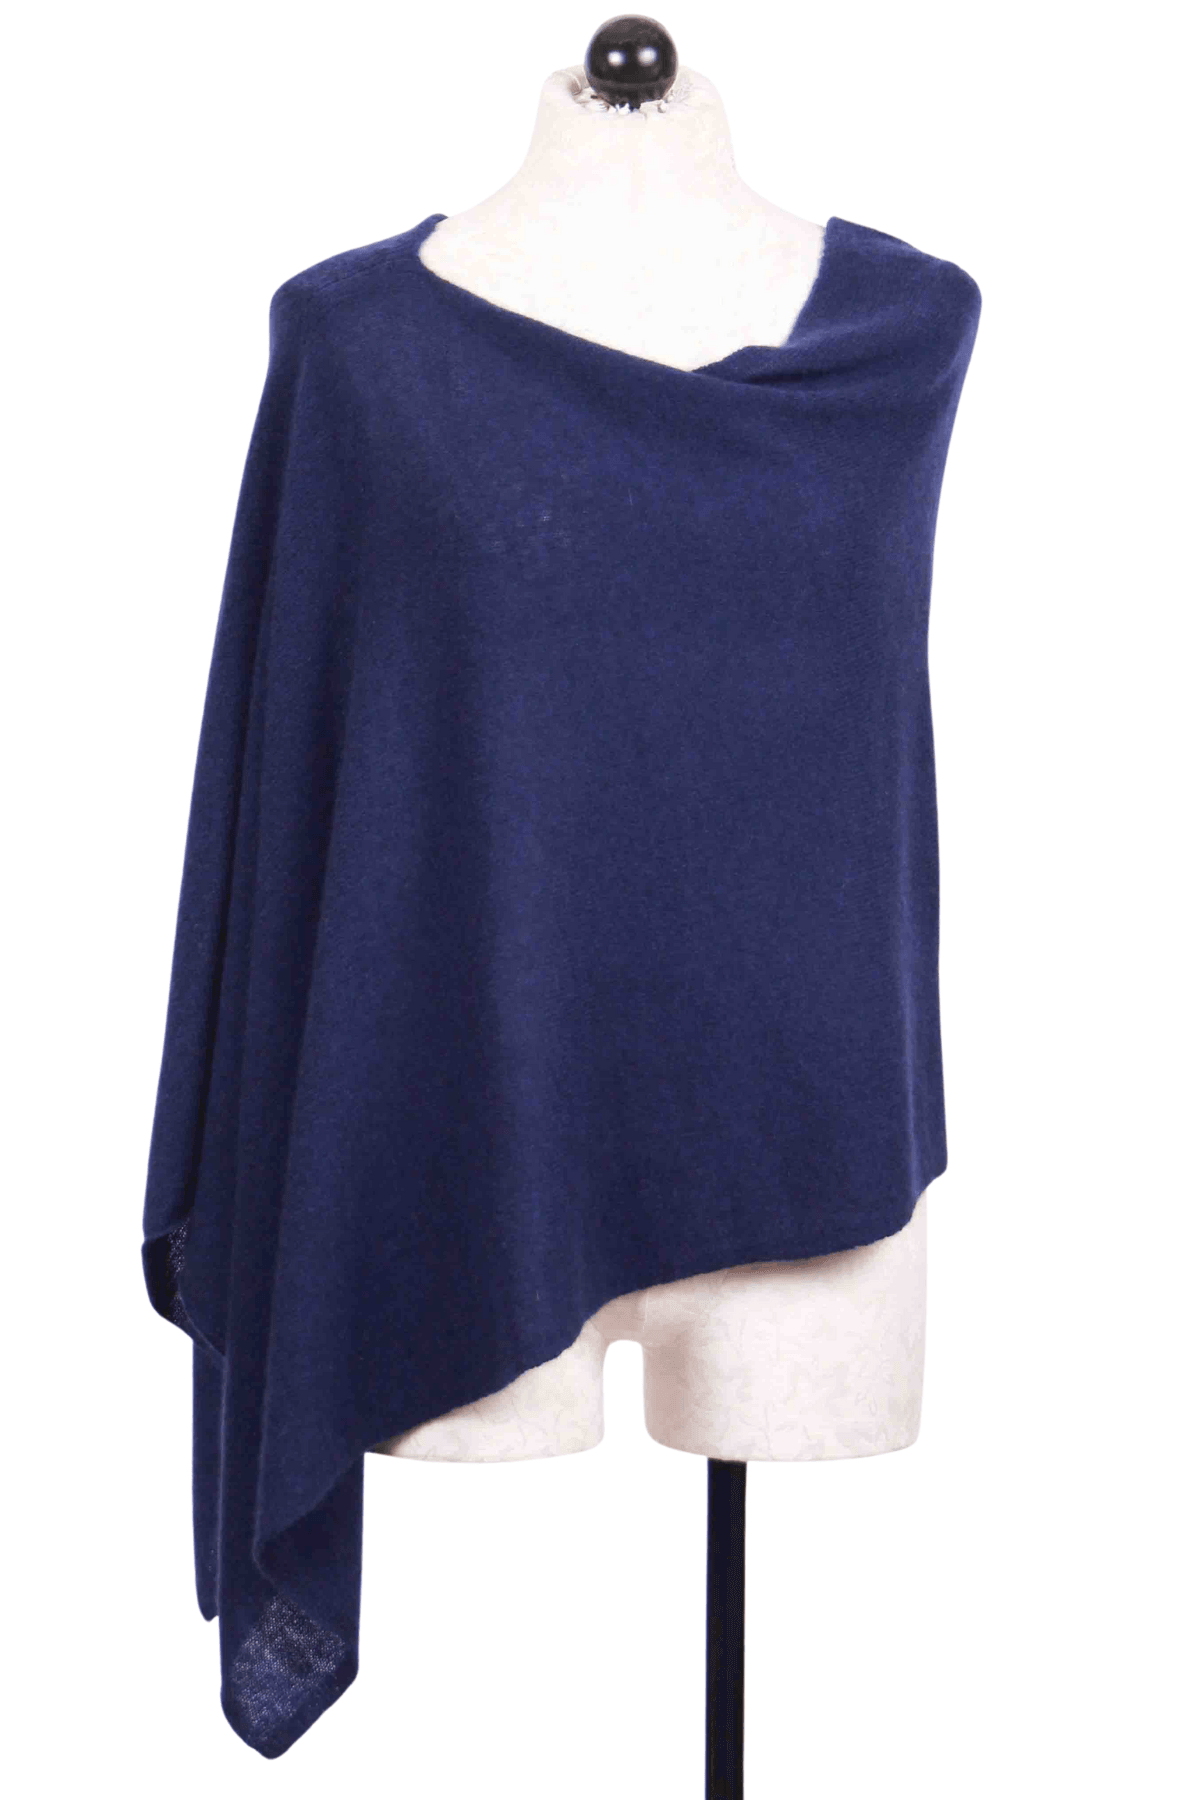 Midnight Draped Cashmere Dress Topper by Alashan Cashmere